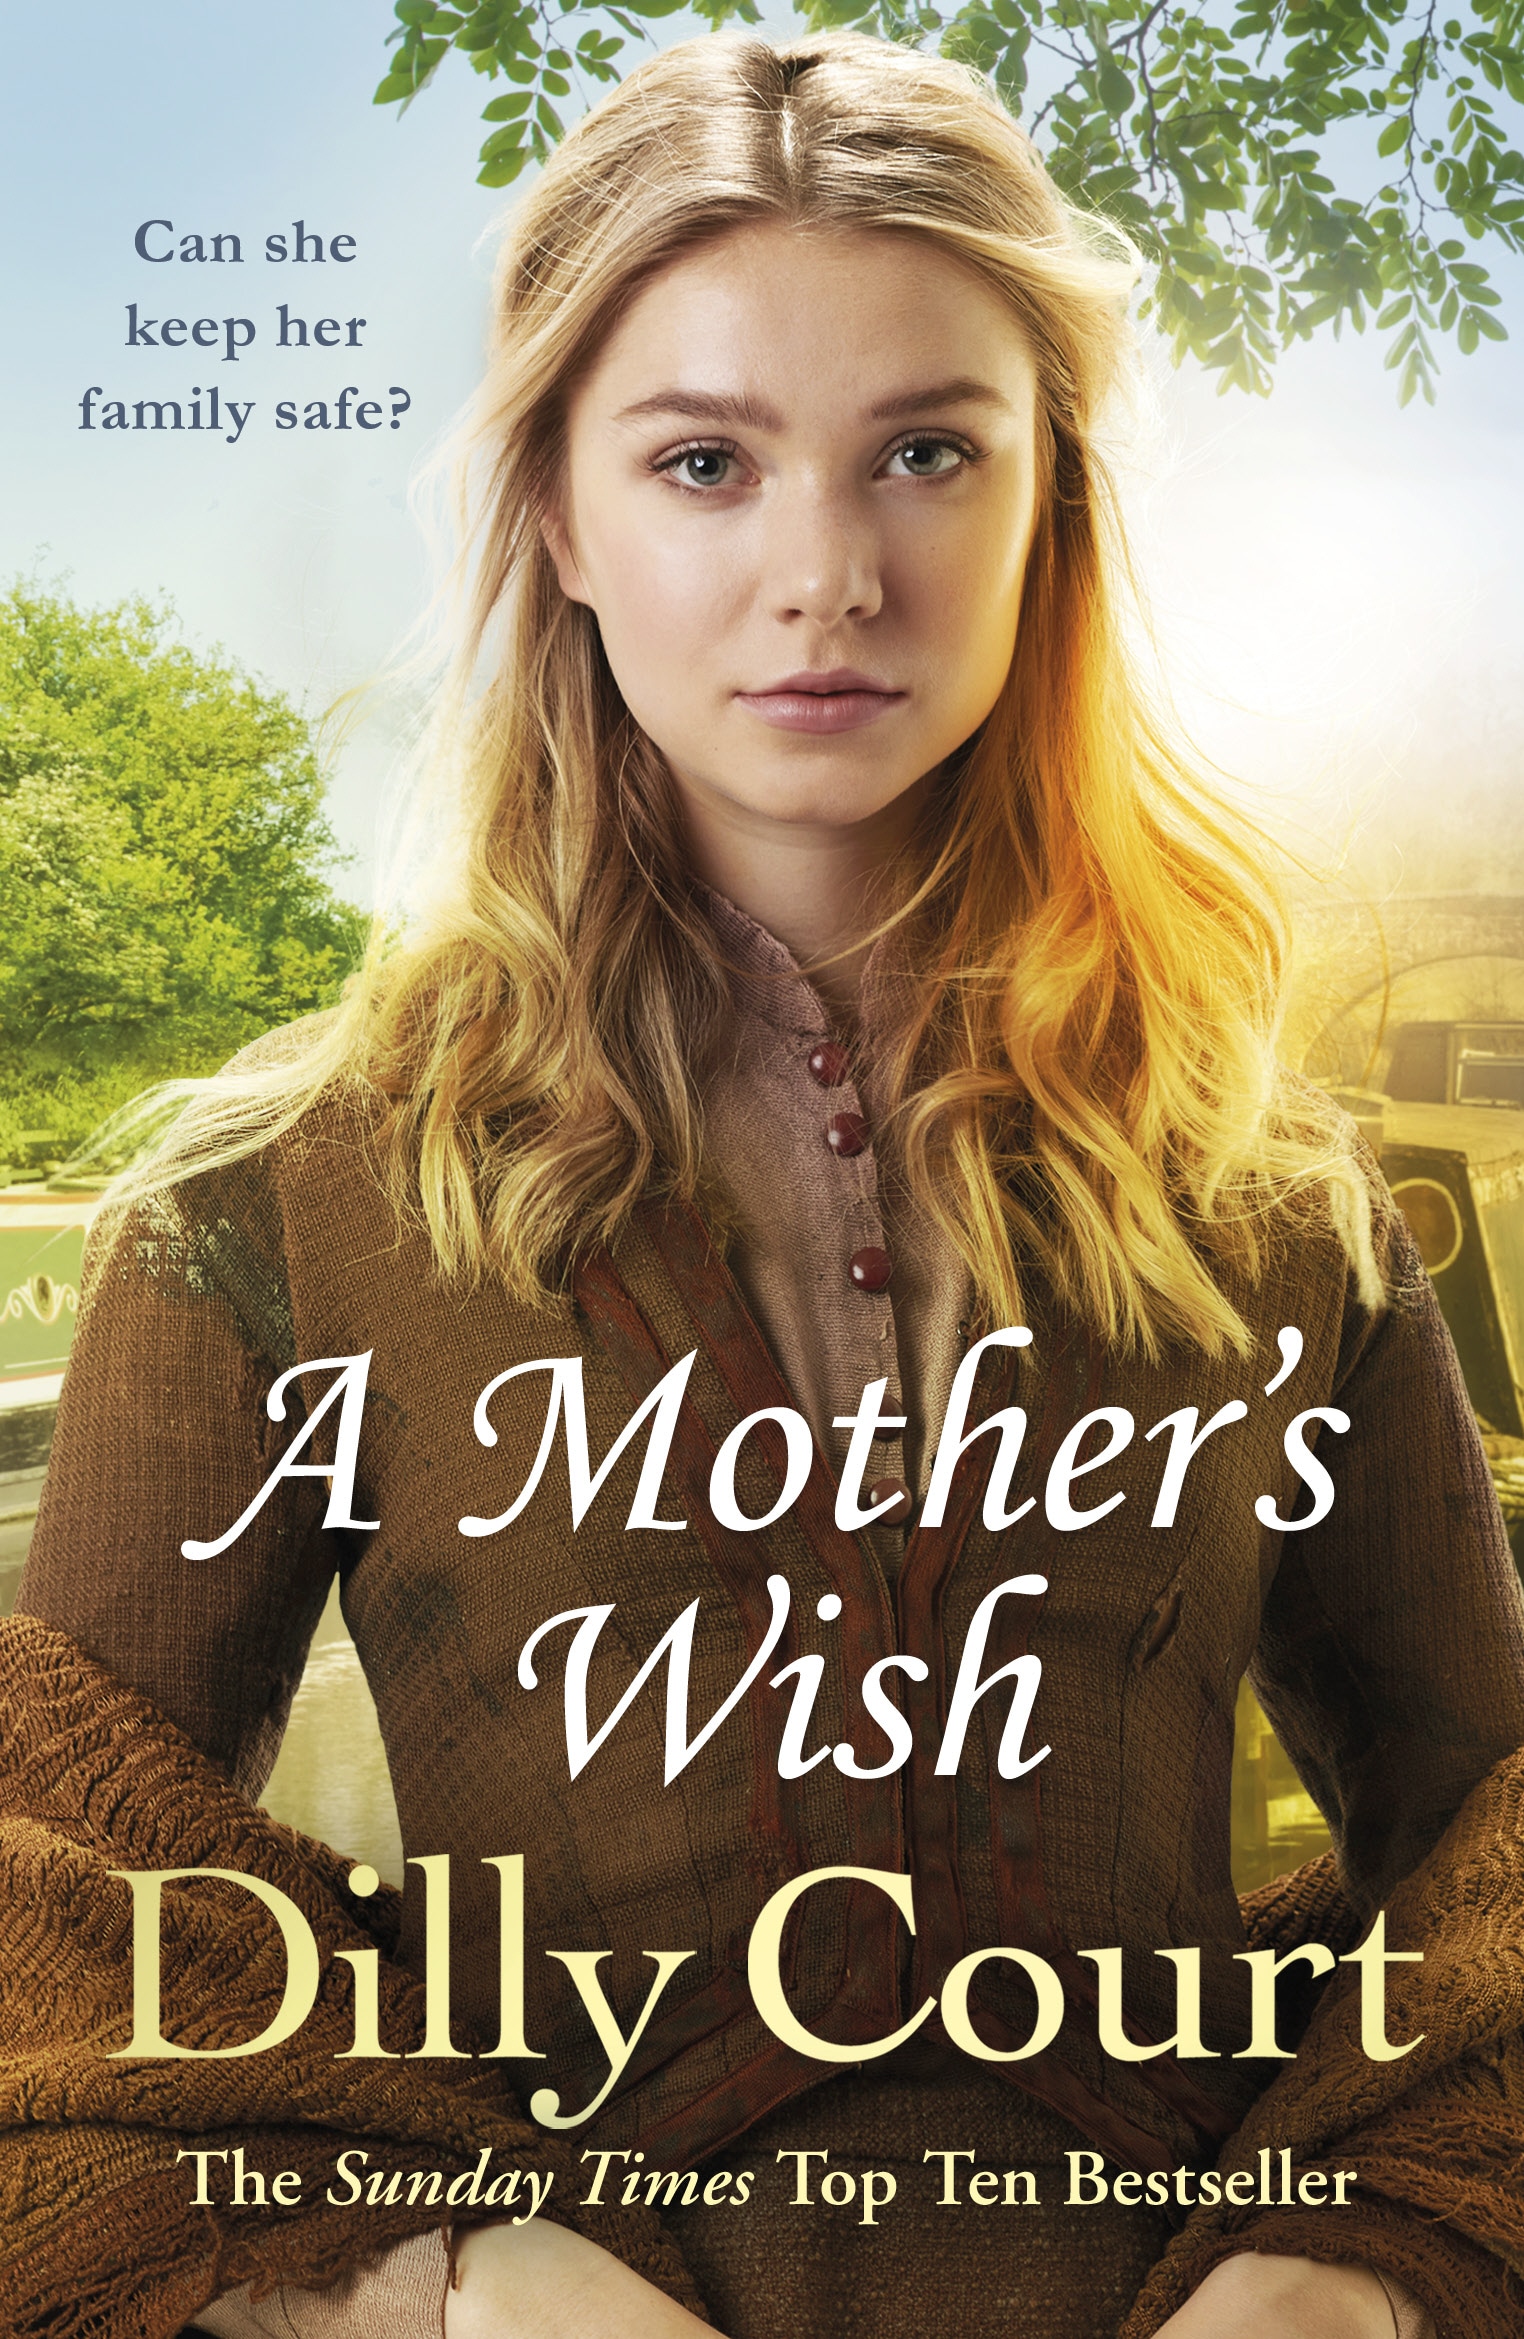 Book “A Mother's Wish” by Dilly Court — December 26, 2019